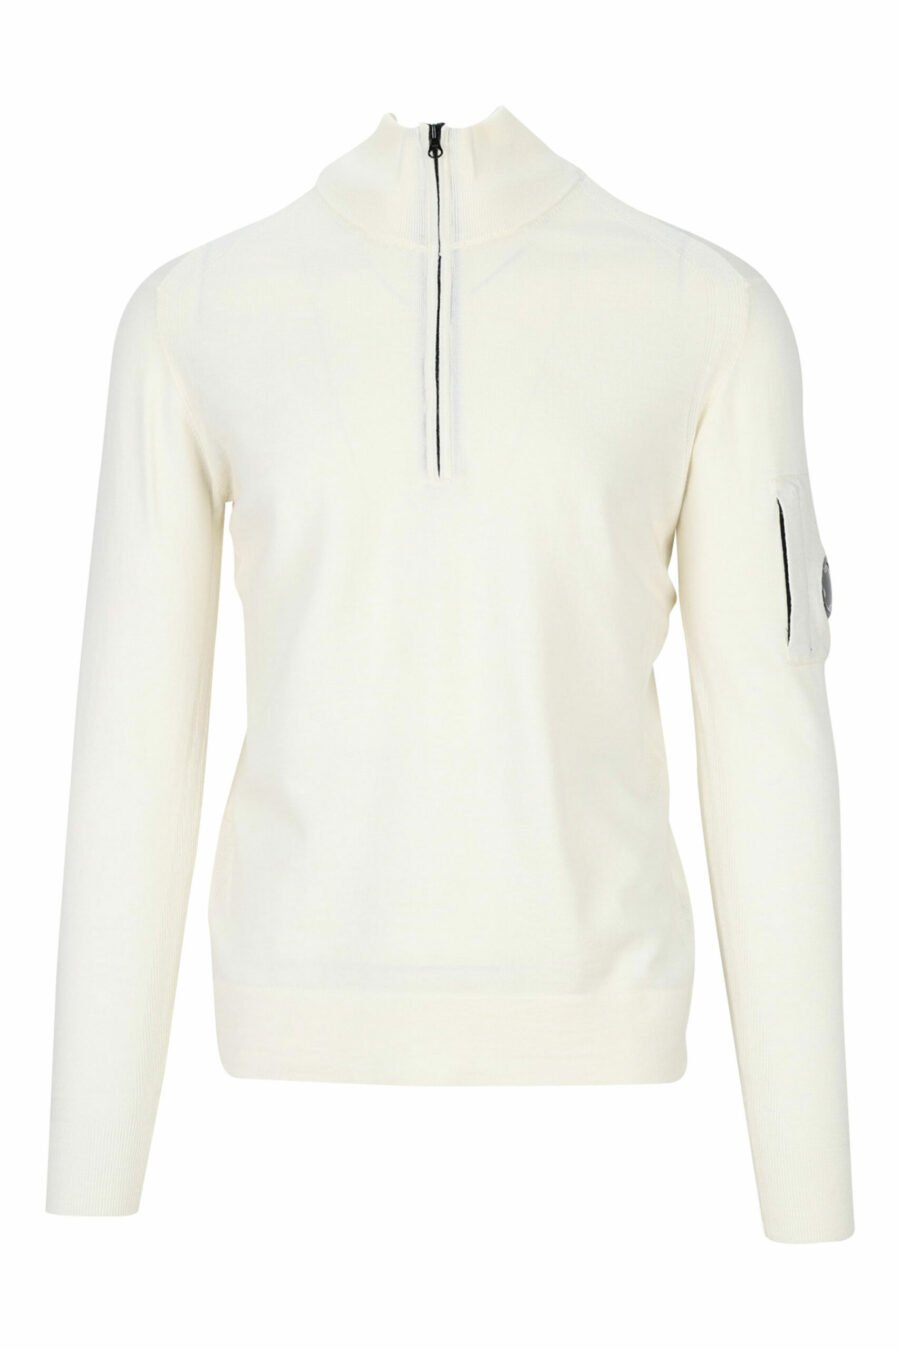 White turtleneck jumper with zip and side lens logo - 7620943601213 scaled